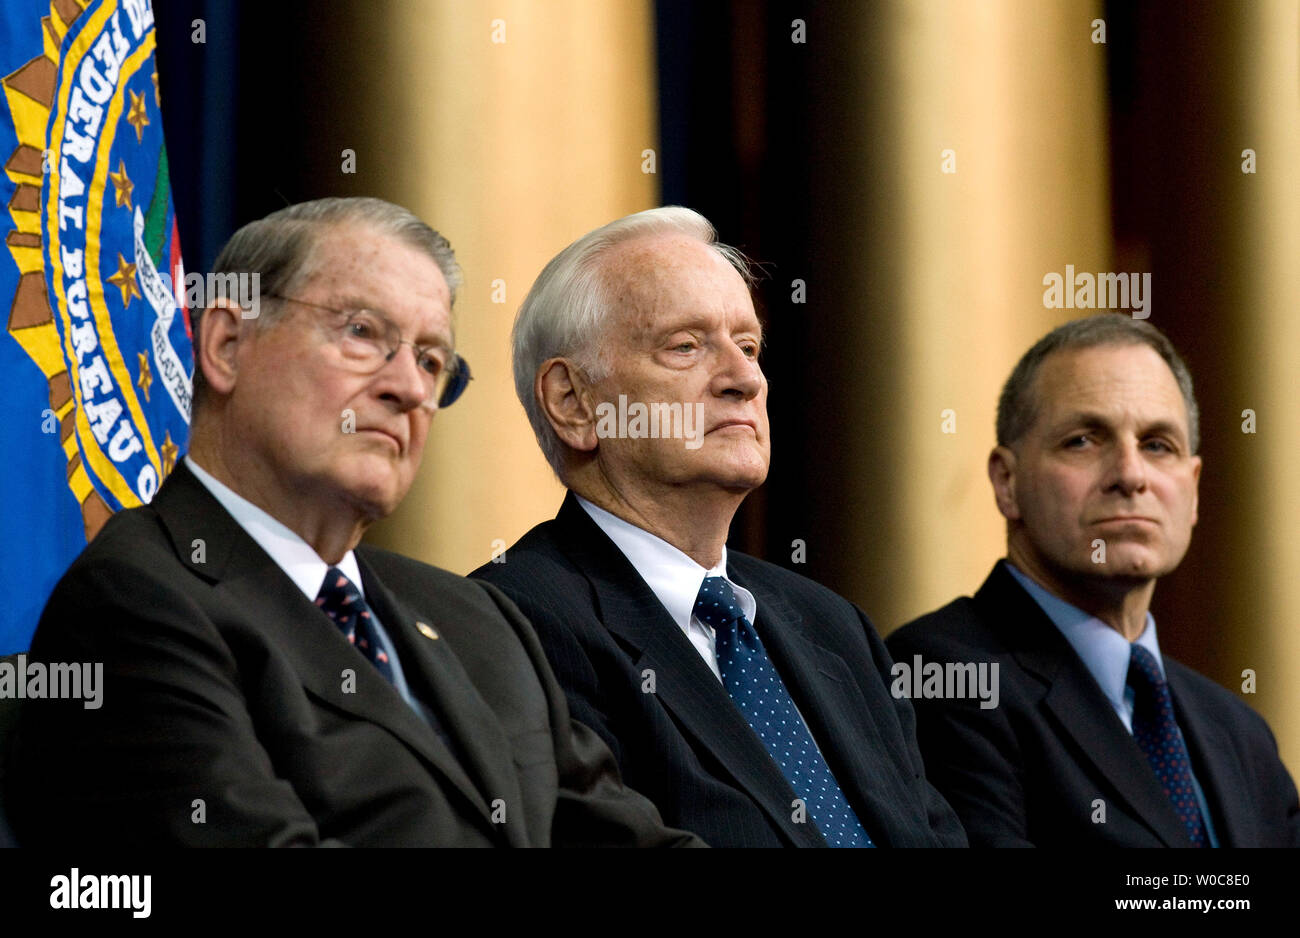 Former Federal Bureau of Investigation Directors (L to R) William S. Sessions, William H. Webster, and Louis Freeh attend an event at the National Building Museum to commemorate the Federal Bureau of Investigation's 100th Anniversary in Washington on July 17, 2008. (UPI Photo/Patrick D. McDermott) Stock Photo